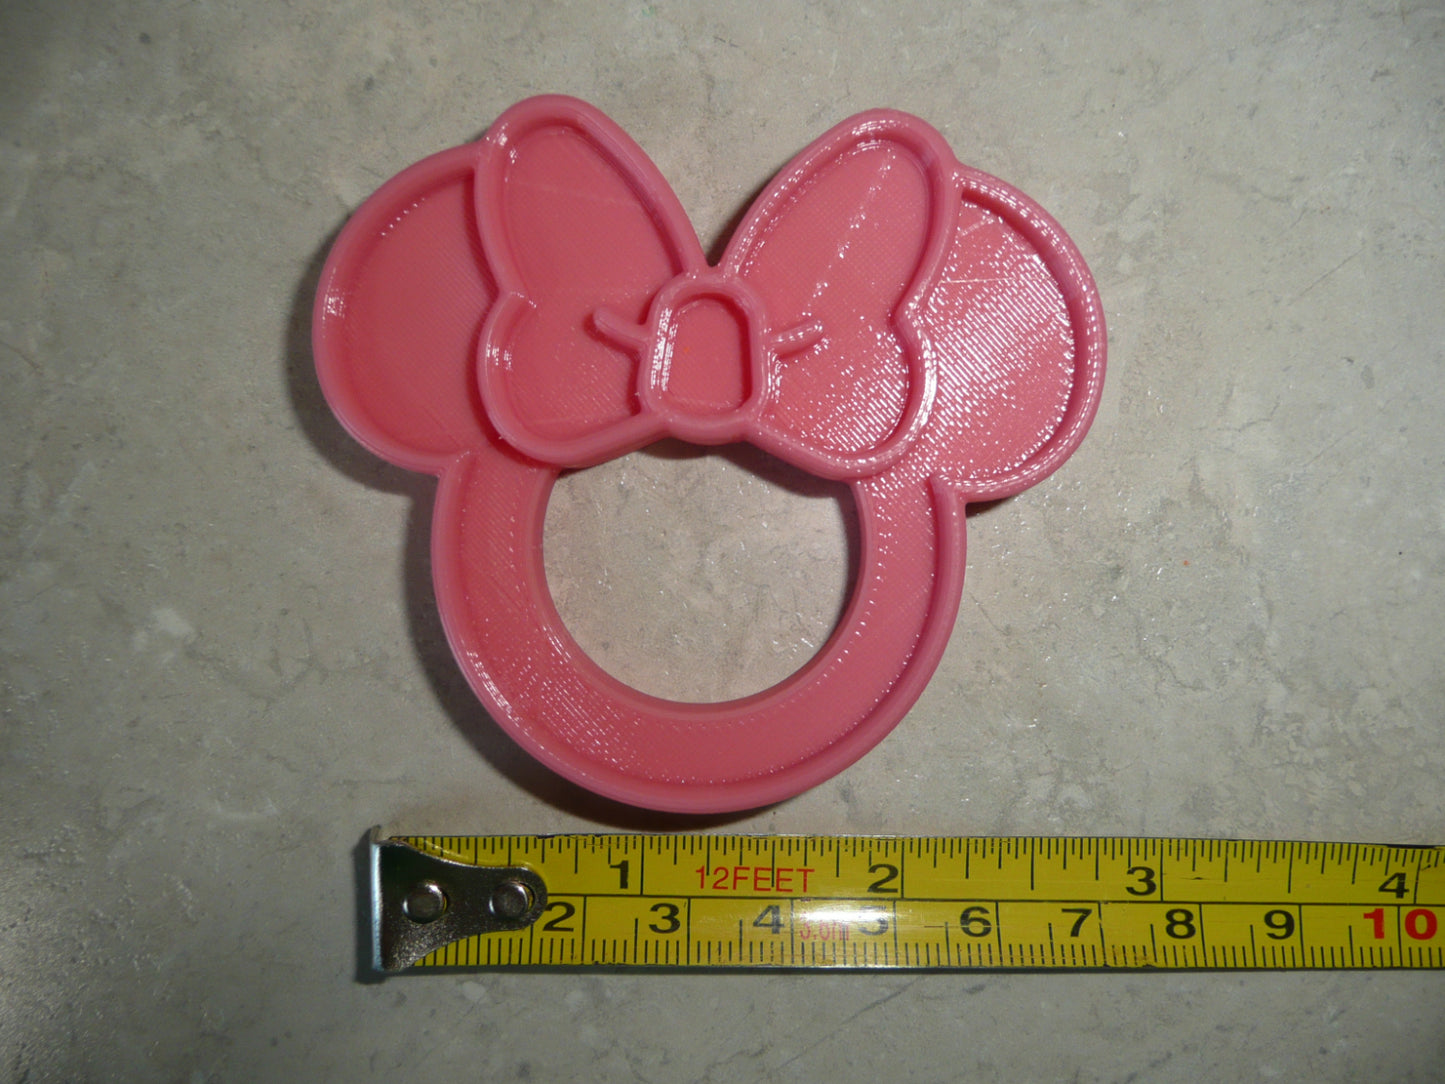 Minnie Mouse Themed Pink Napkin Ring Holders Set Of 4 Made In USA PR4810